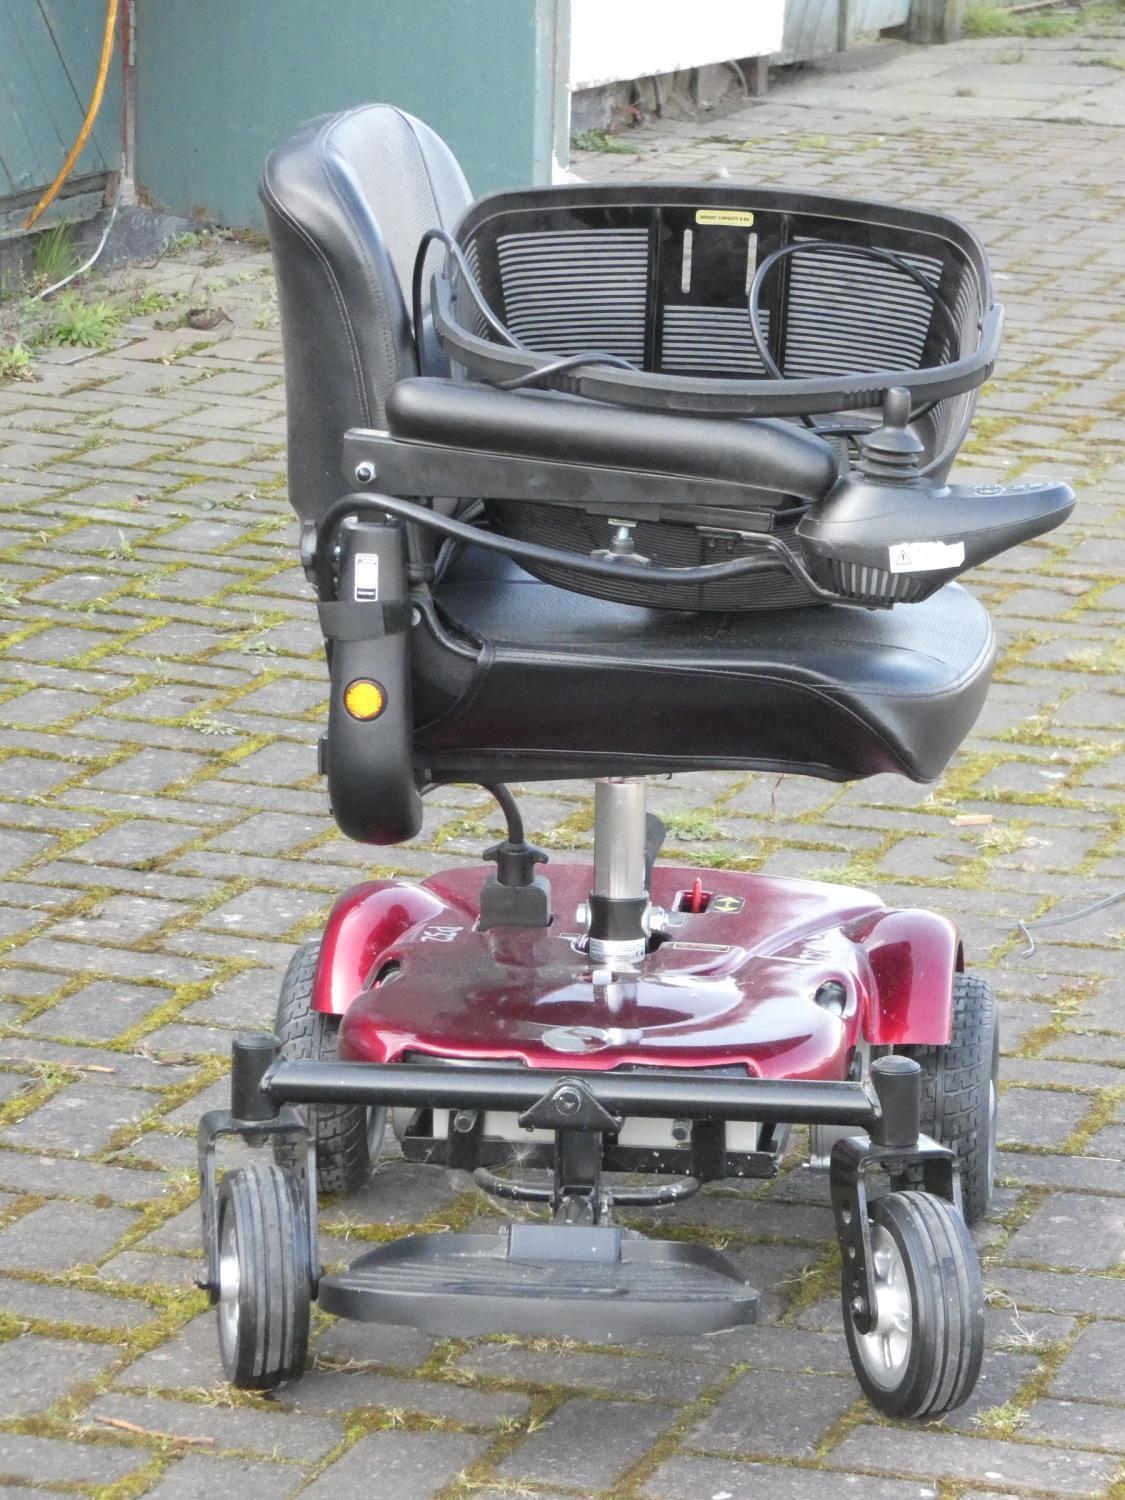 A Rascal battery operated mobility chair, complete with battery charger